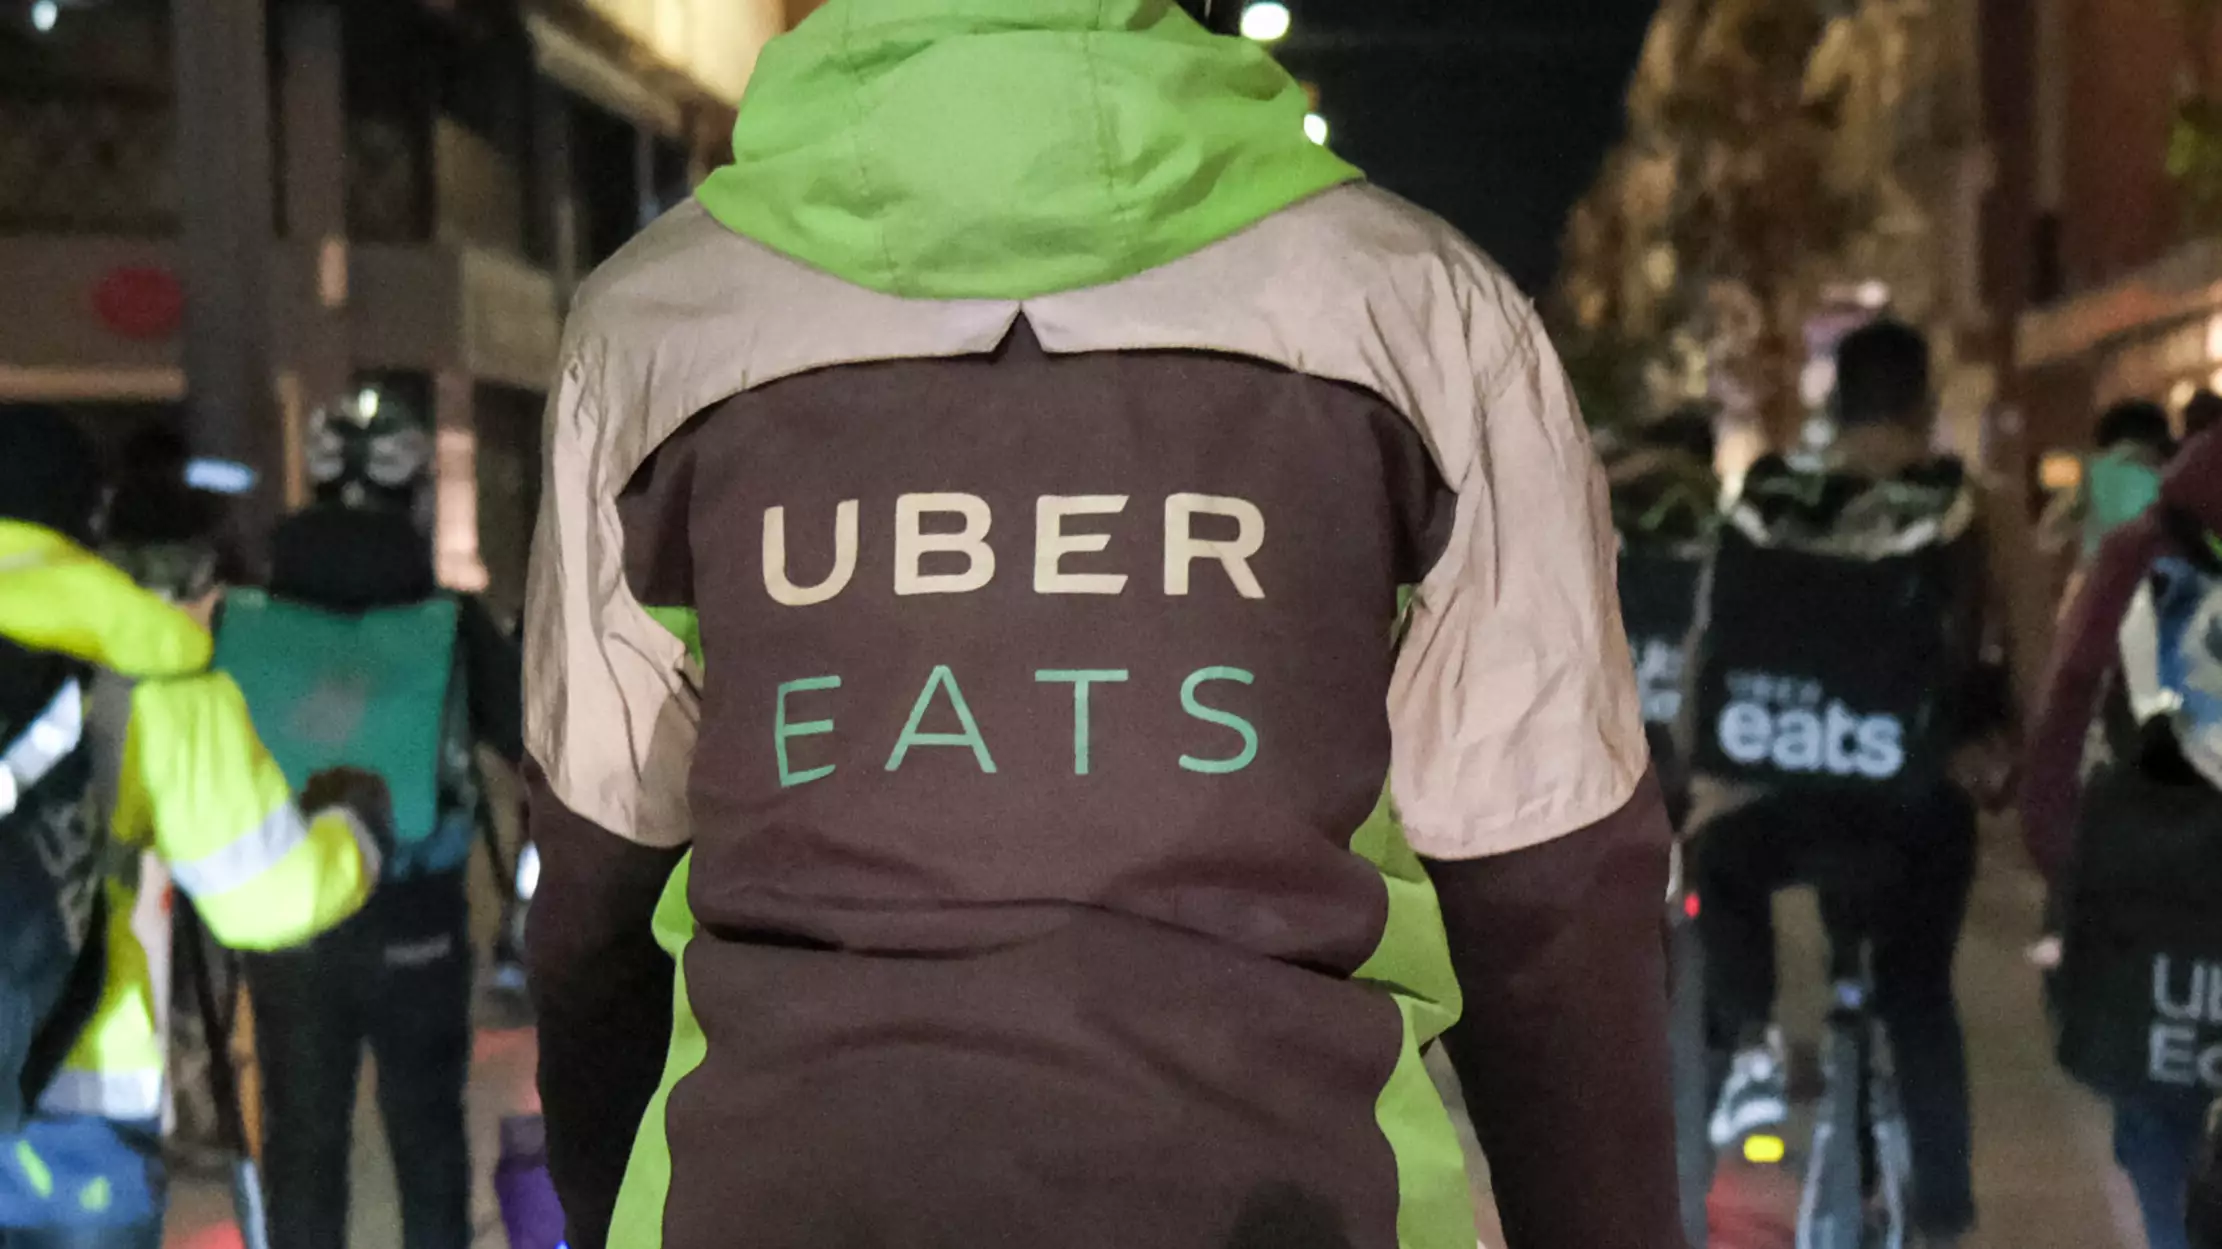 Sydney Uber Eats Drivers Earn Less Than Minimum Wage During Peak Times, Inquiry Finds